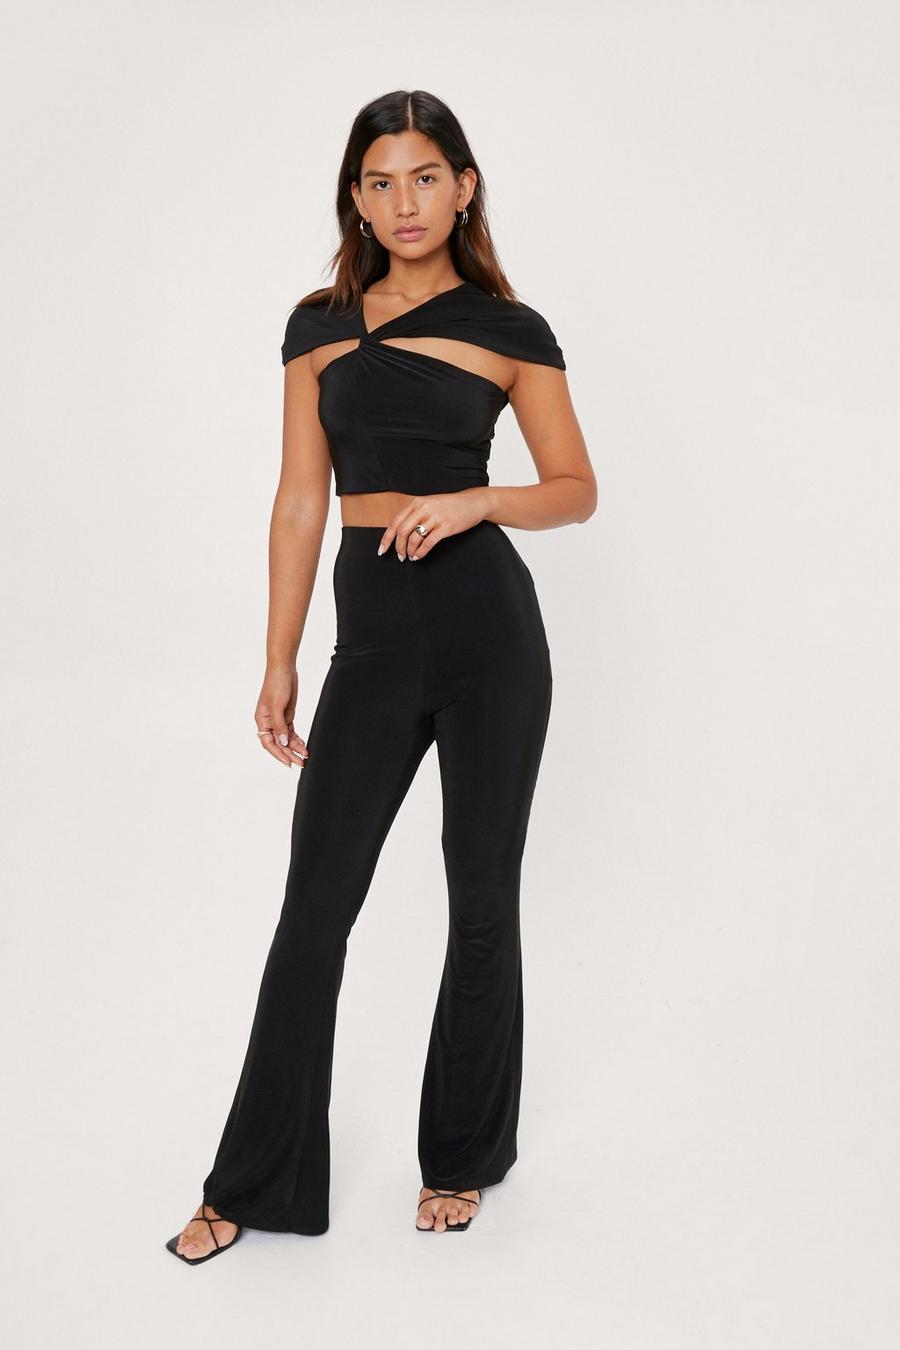 Knotted Off the Shoulder Top and Flares Set